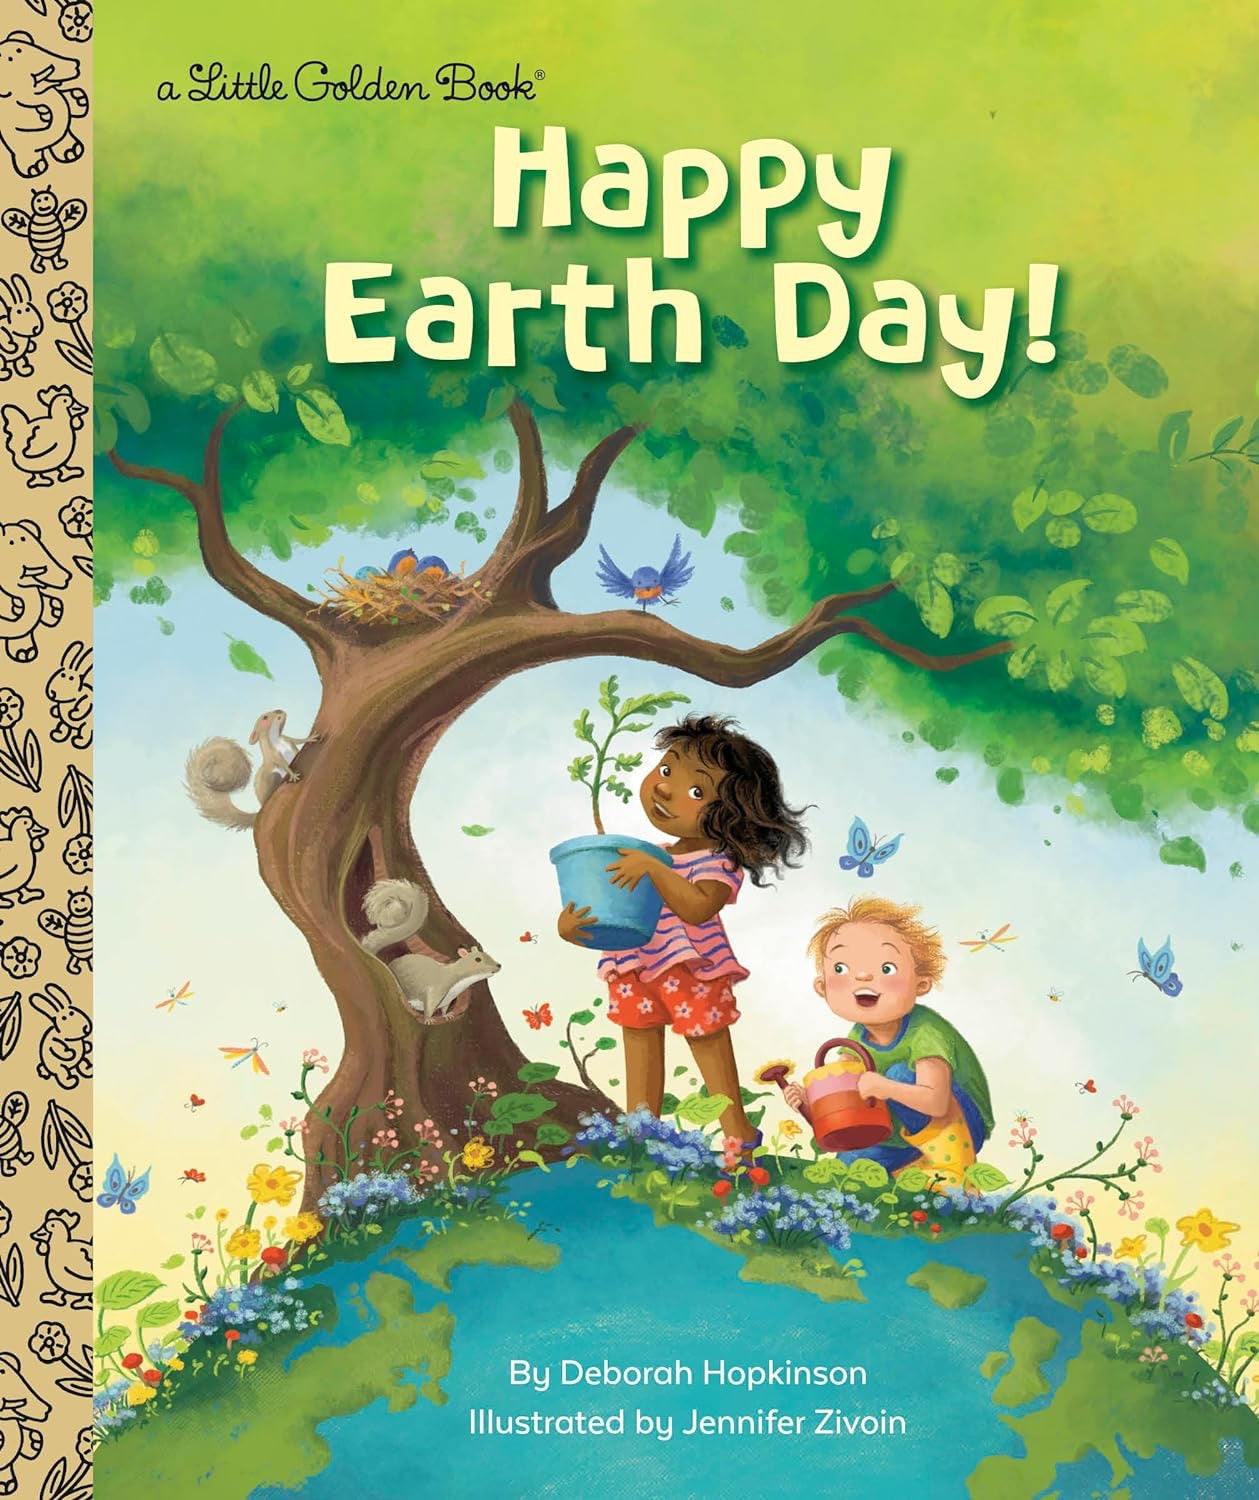 "Happy Earth Day" Little Golden Book